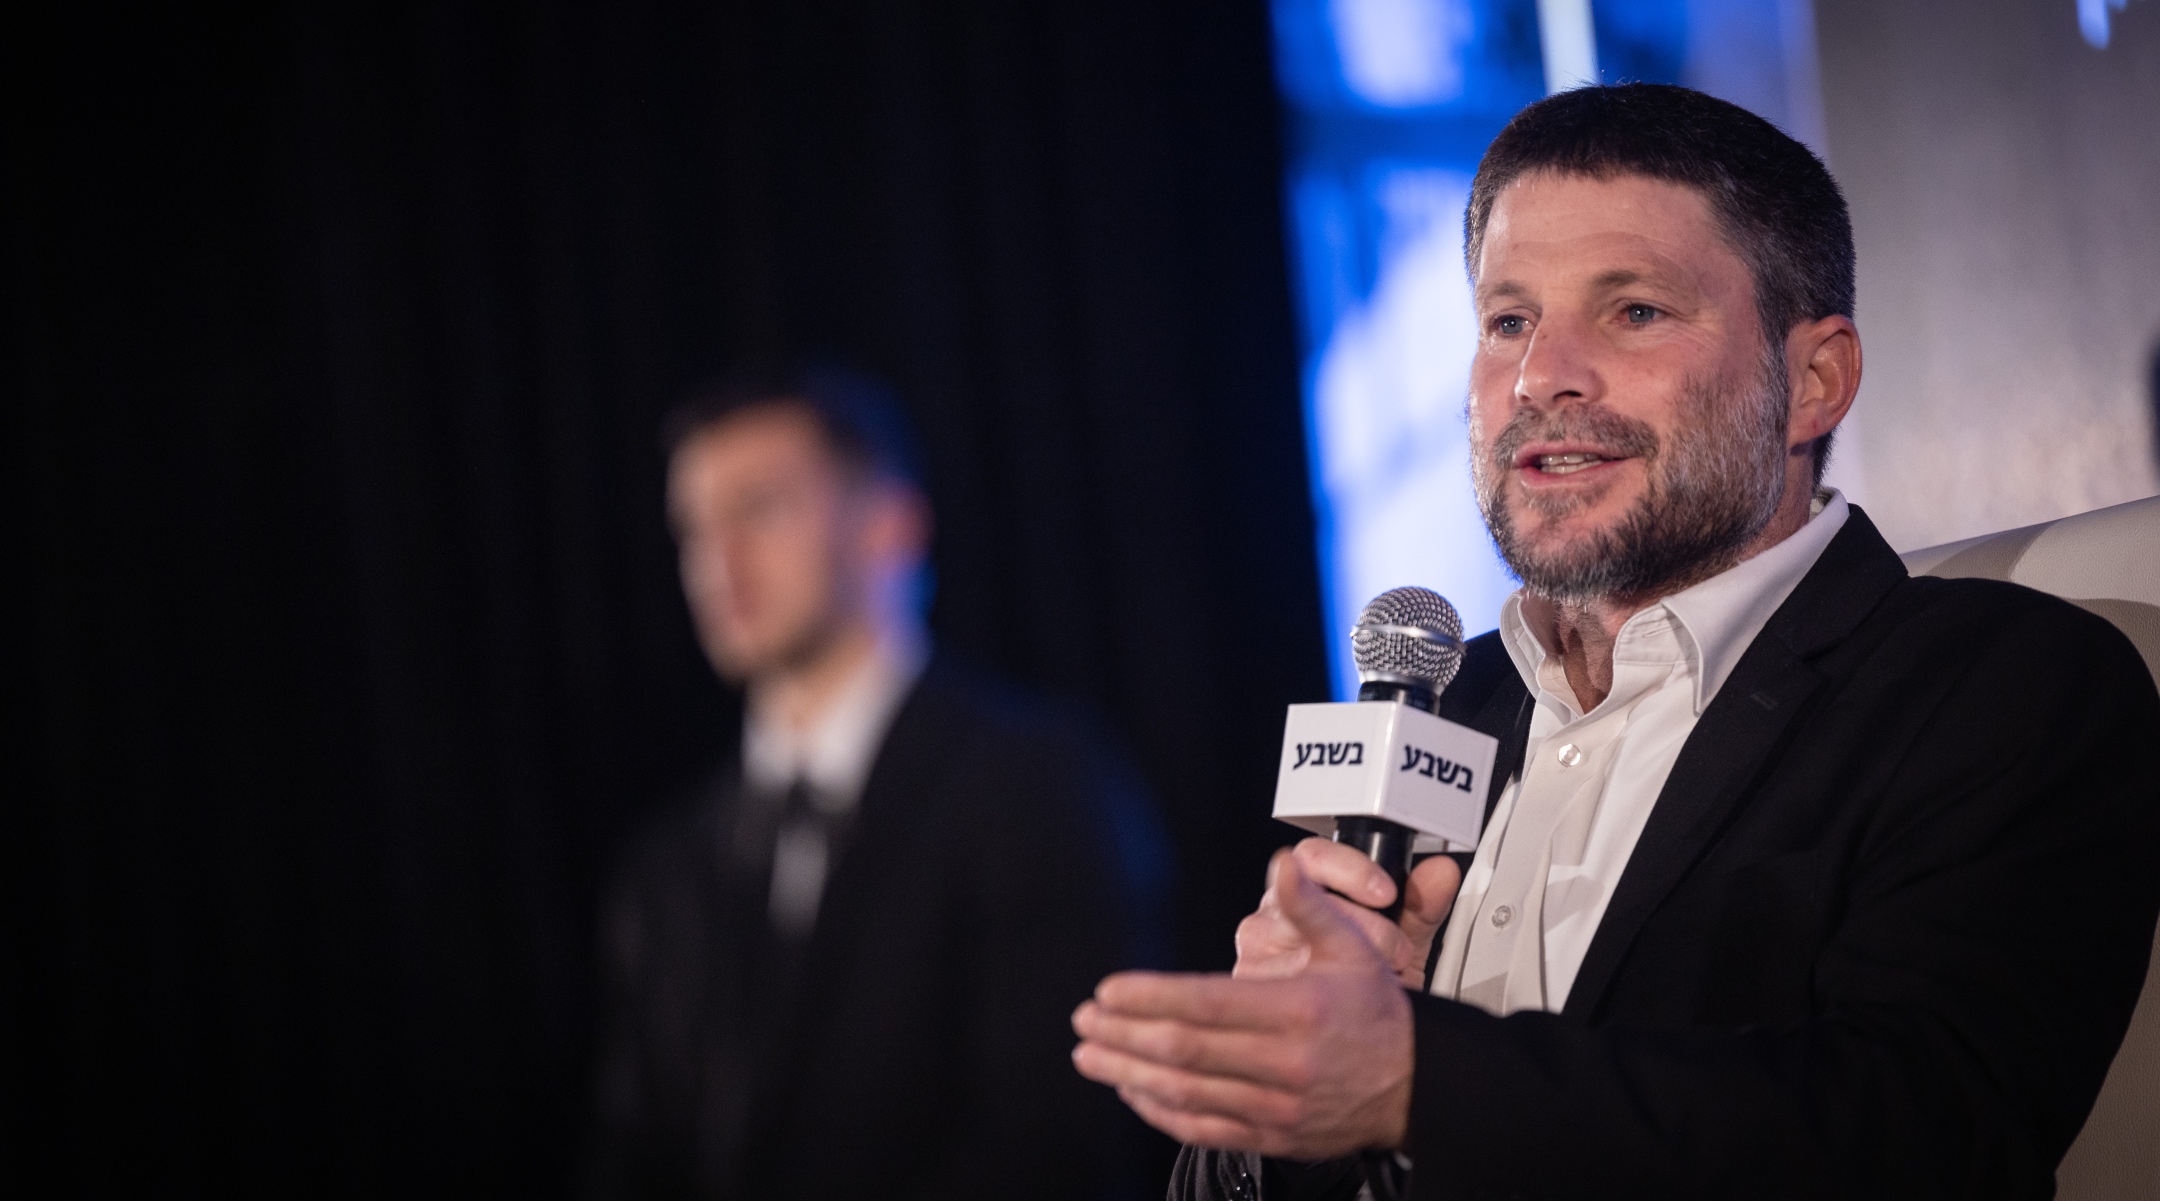 Minister of Finance and Head of the Religious Zionist Party Bezalel Smotrich at the annual Jerusalem Conference of the ‘Besheva’ group in Jerusalem, Feb. 21, 2023. (Yonatan Sindel/Flash90)